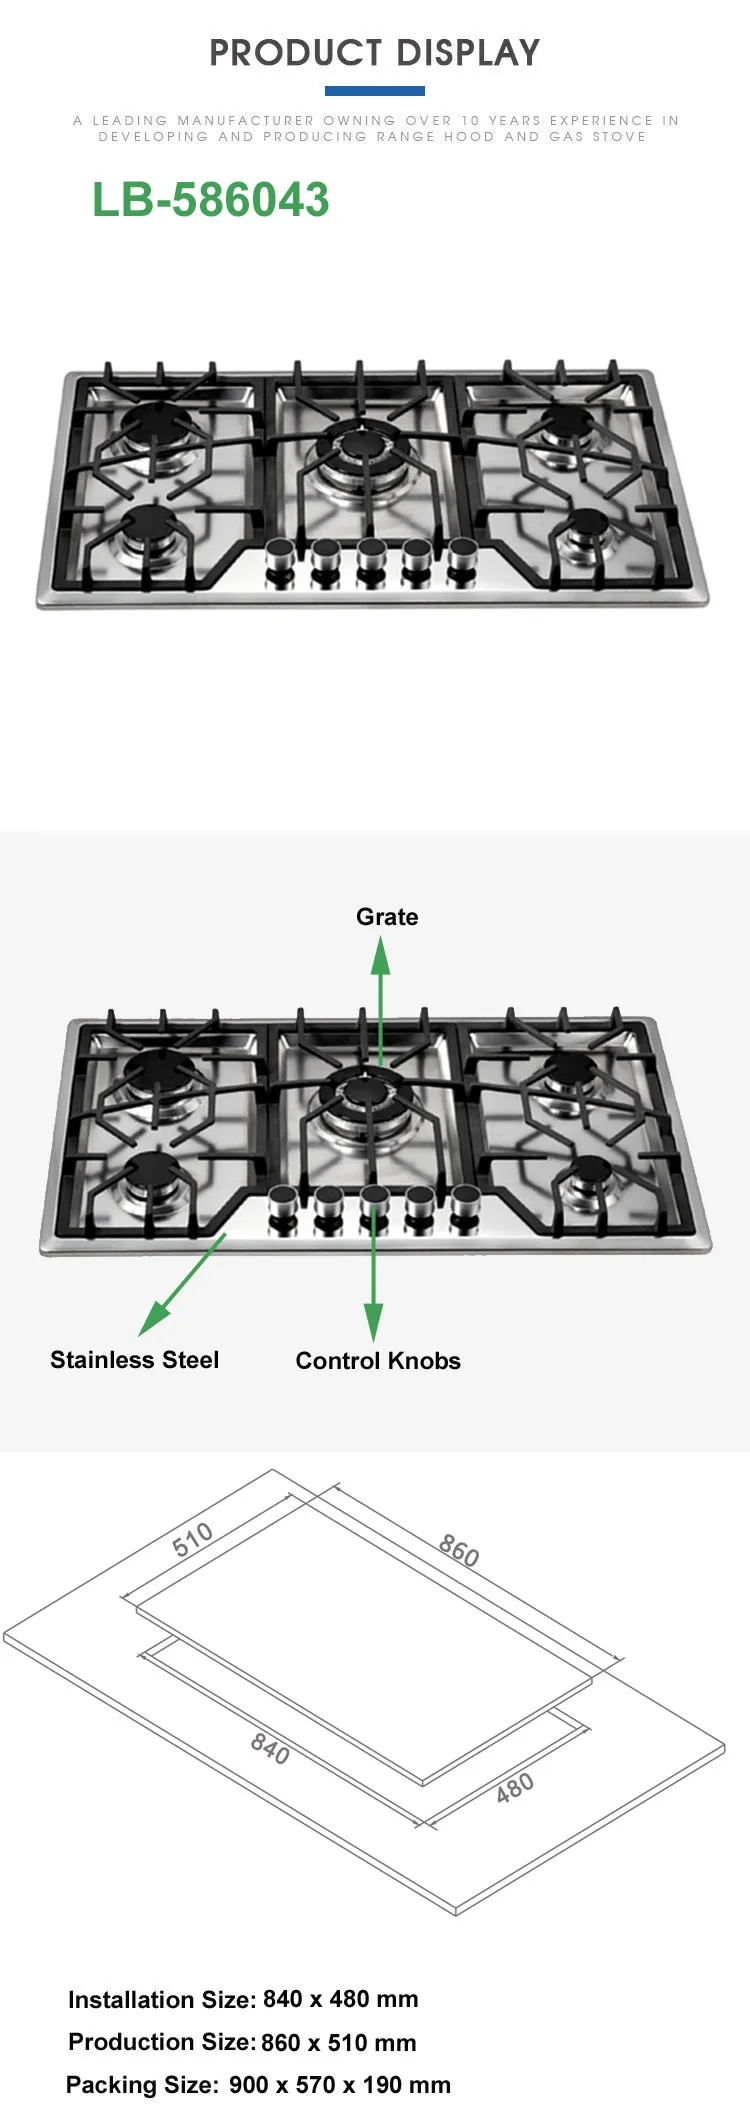 Professional Gas Cooktop in Stainless Steel NG/LPG Convertible Silver 34 Gas Stove Cooktop with 5 Burners 